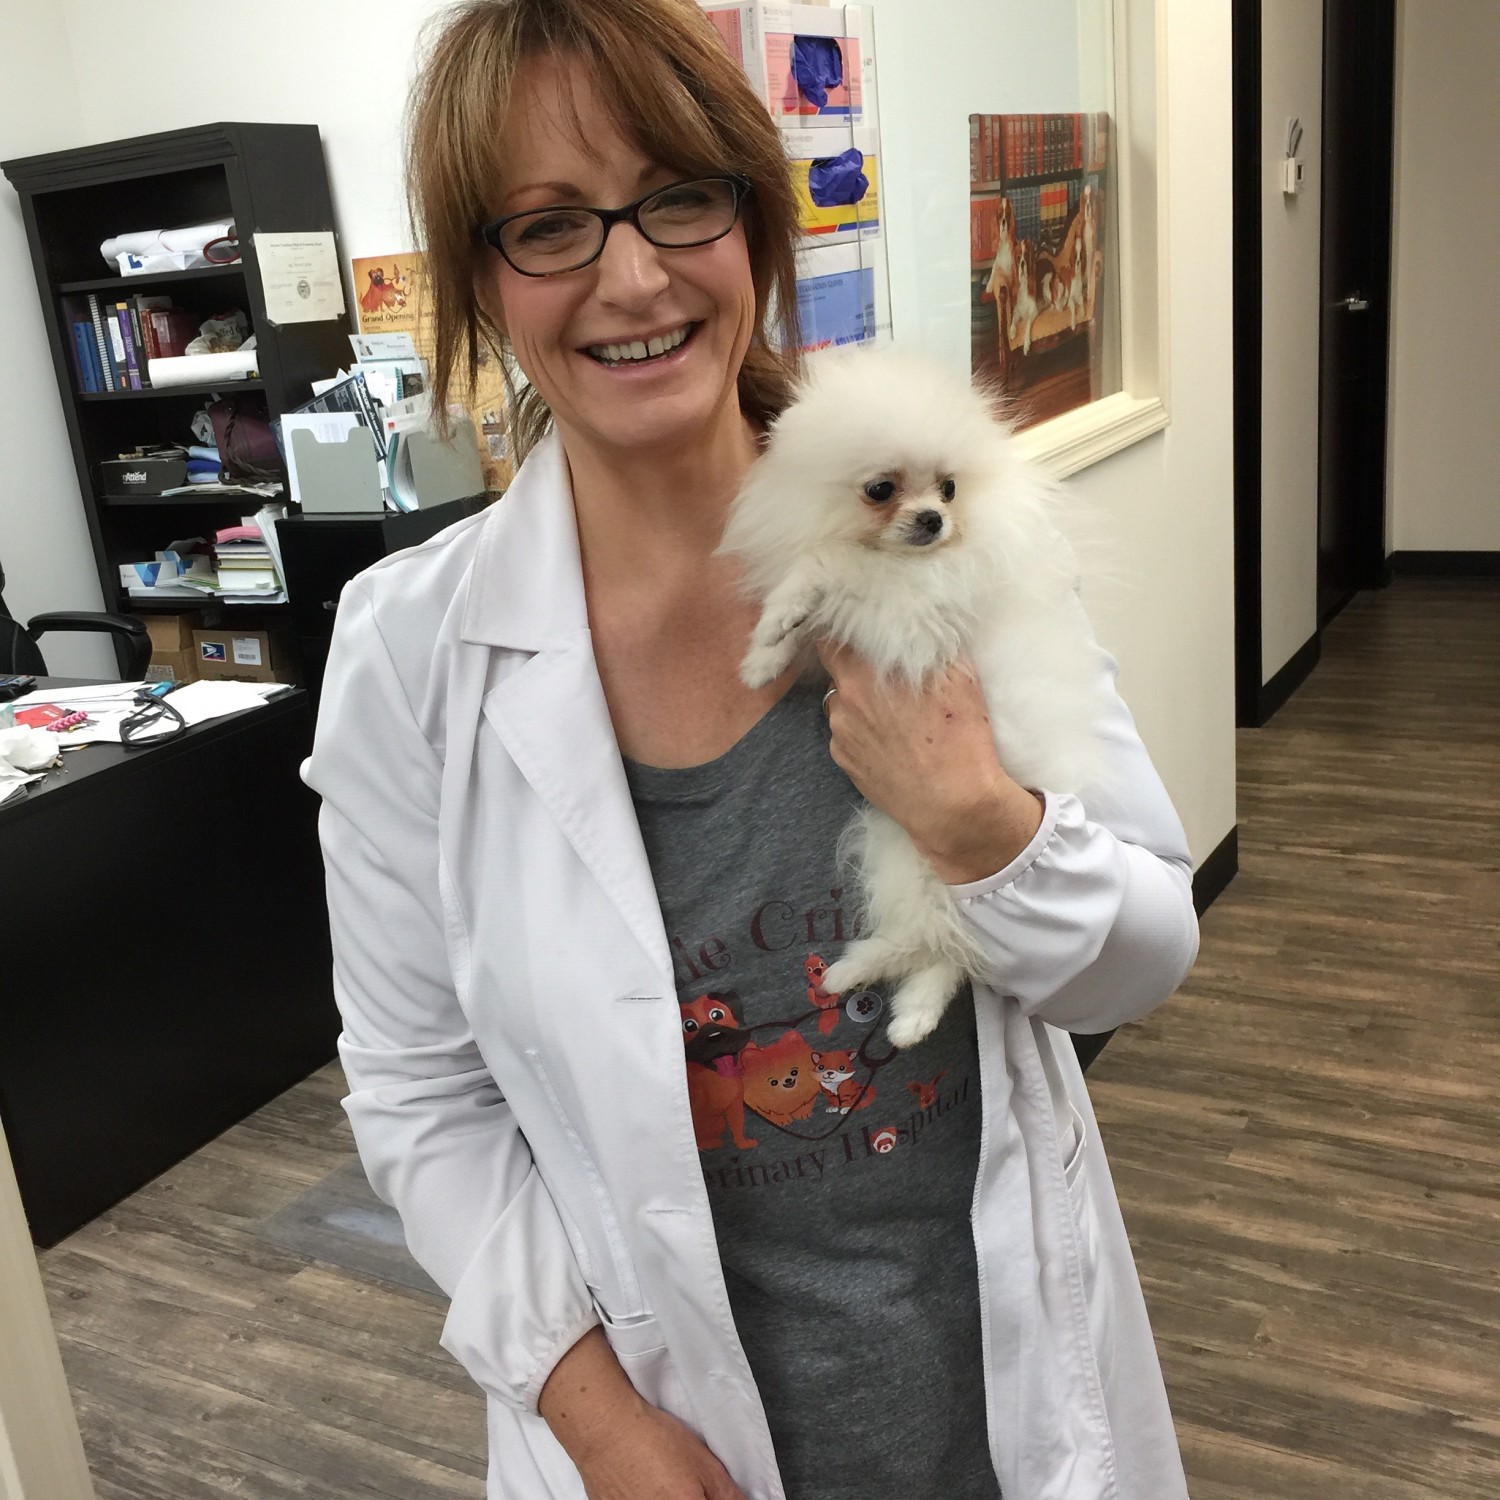 Experienced Loving Pet Care at Little Critters Veterinary Hospital in Gilbert, AZ